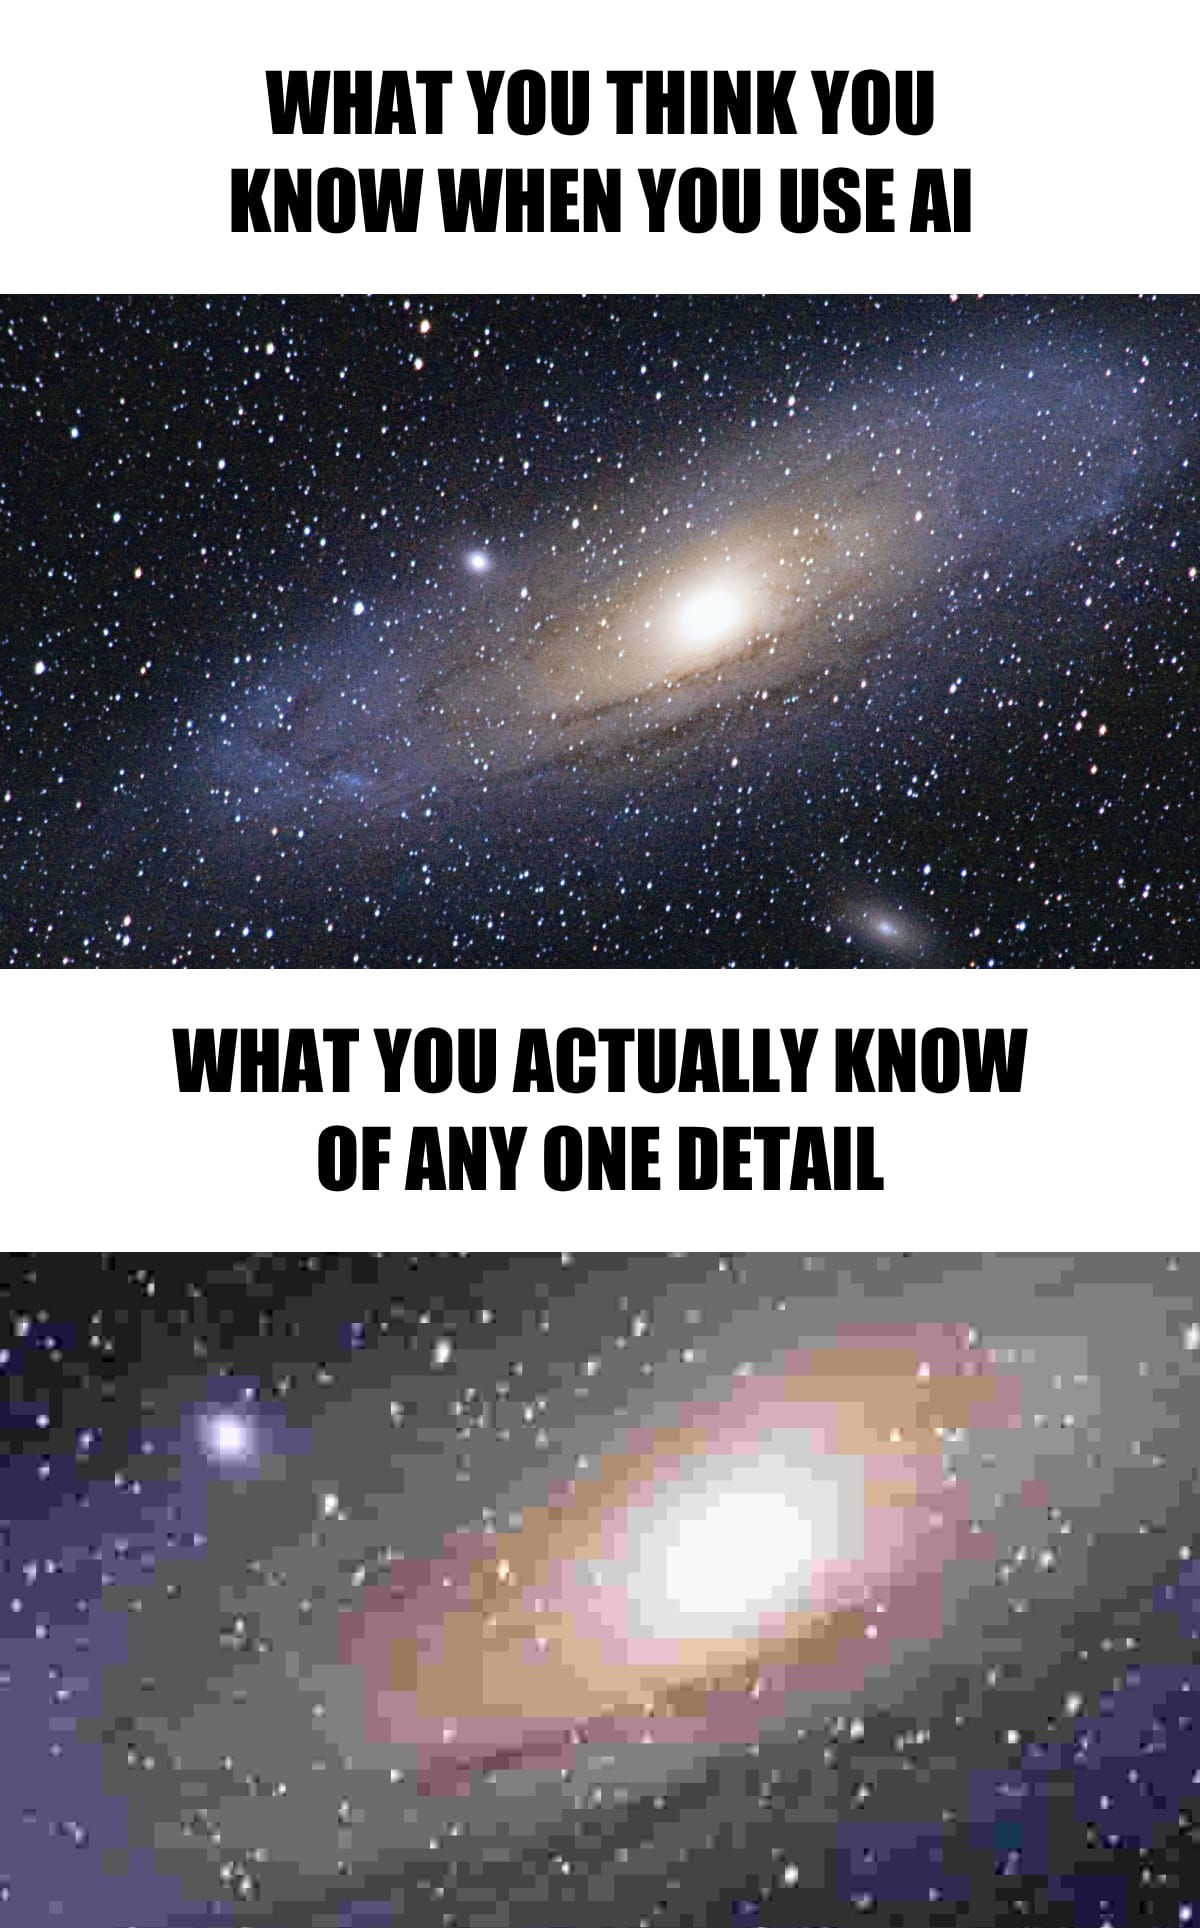 Meme-like photo of the the universe with the caption “What you think you know when you use AI” and below it is a zoomed in part of the same photo with really bad lossy compression artifacts and the caption “What you actully know of any one detail”